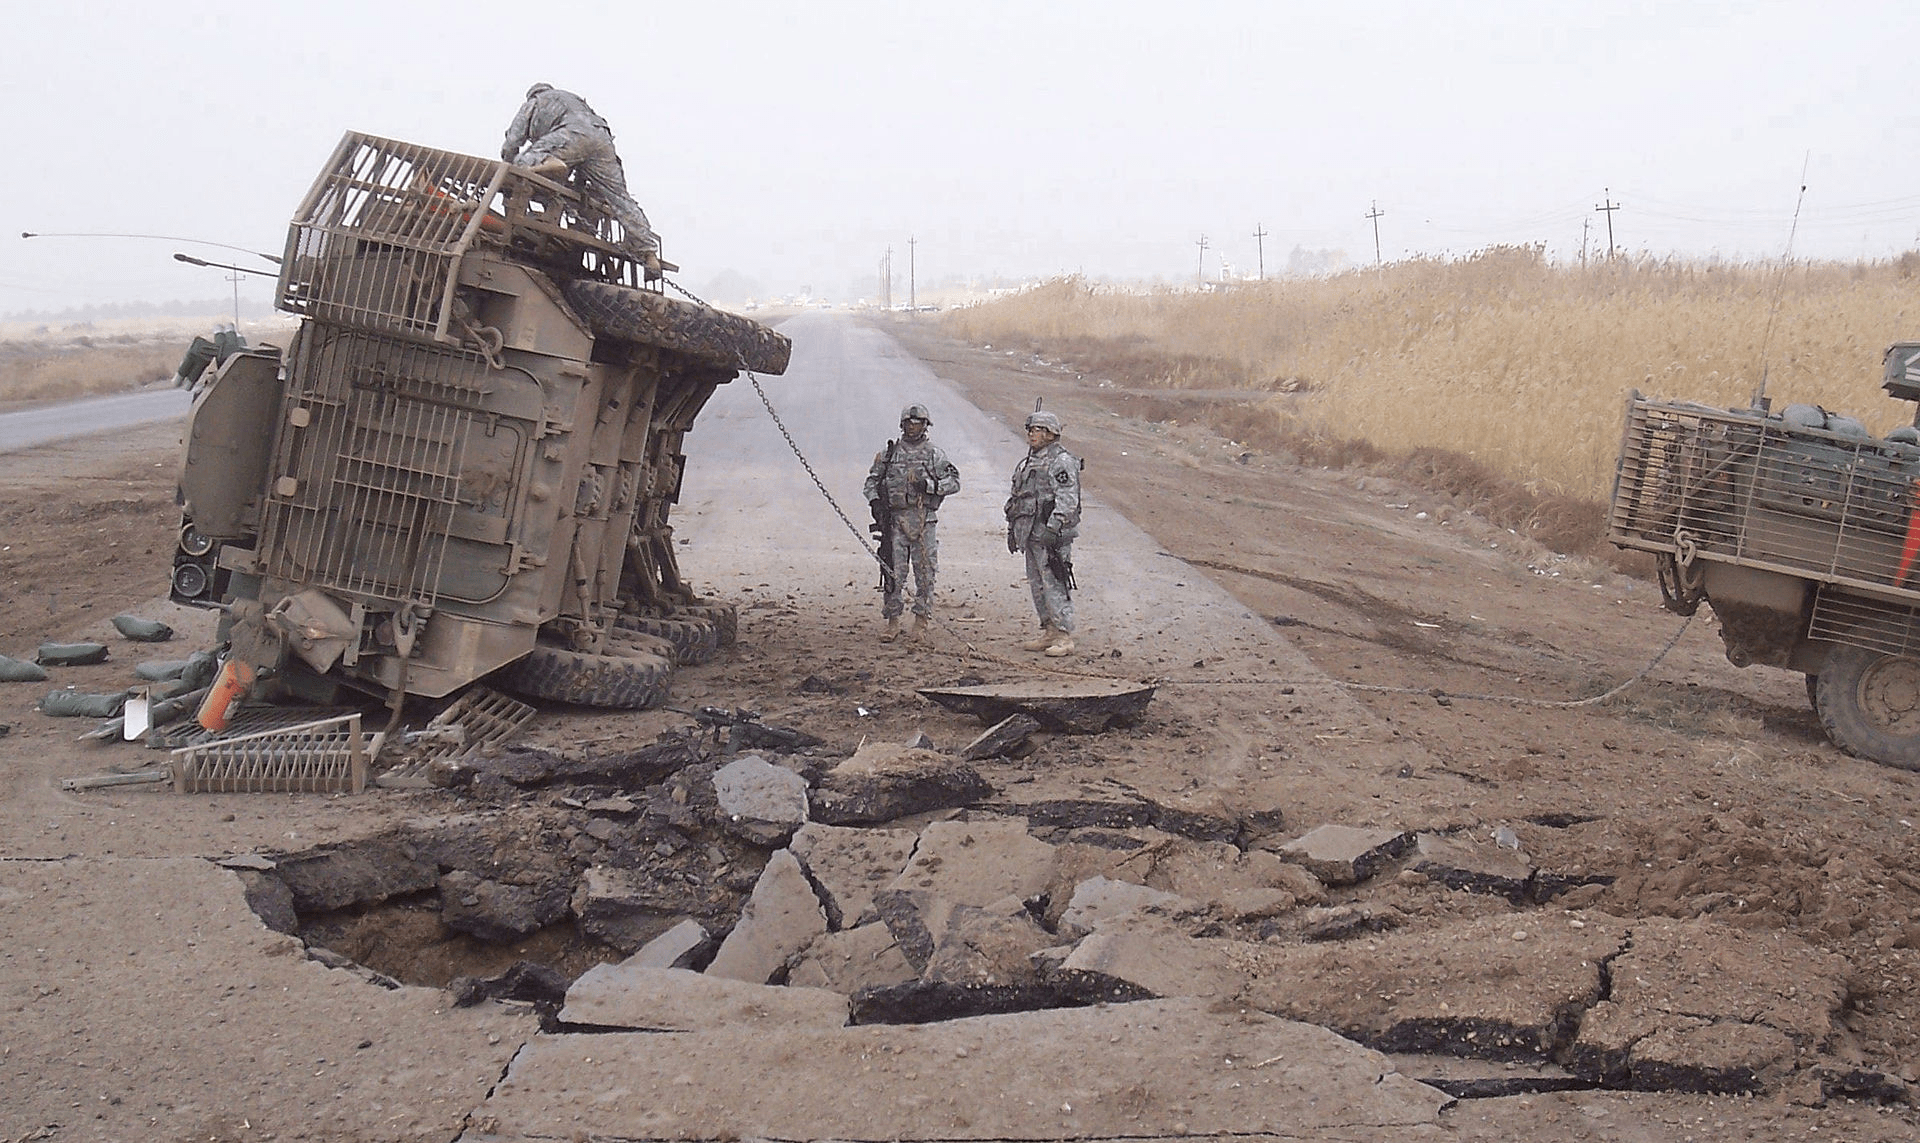 US Military standing next to an overturned tactical vehicle with a bomb blast hole next to them